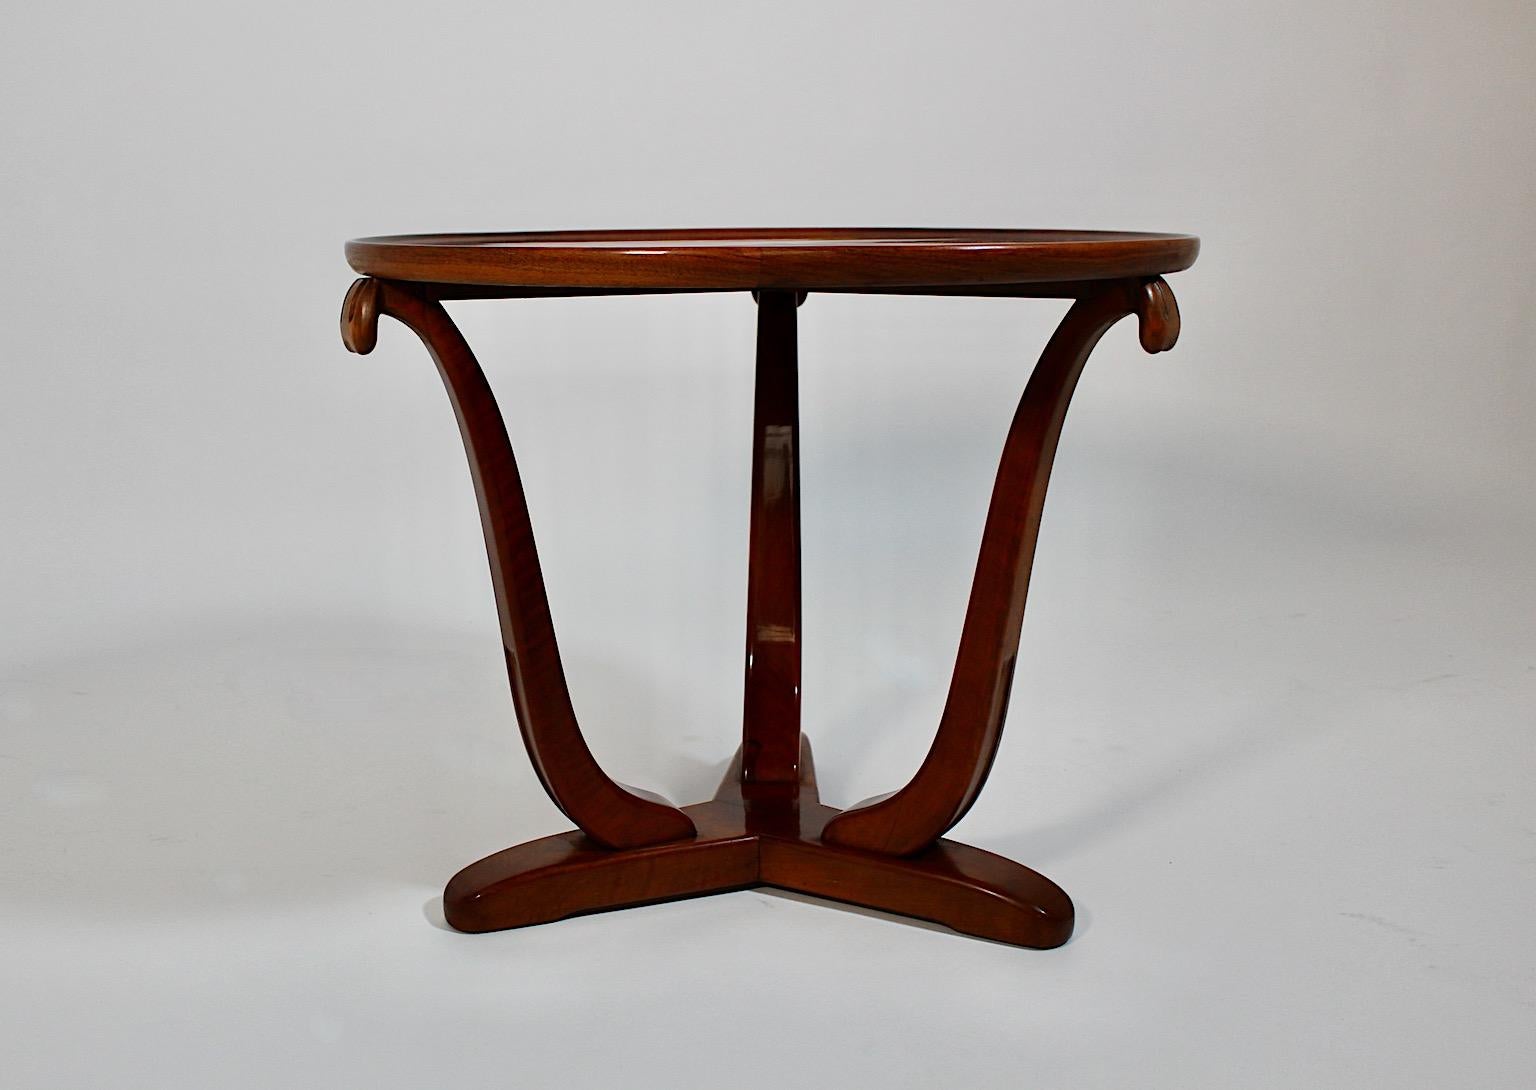 French Art Deco Vintage Solid Walnut Circular Side Table, 1930s, France For Sale